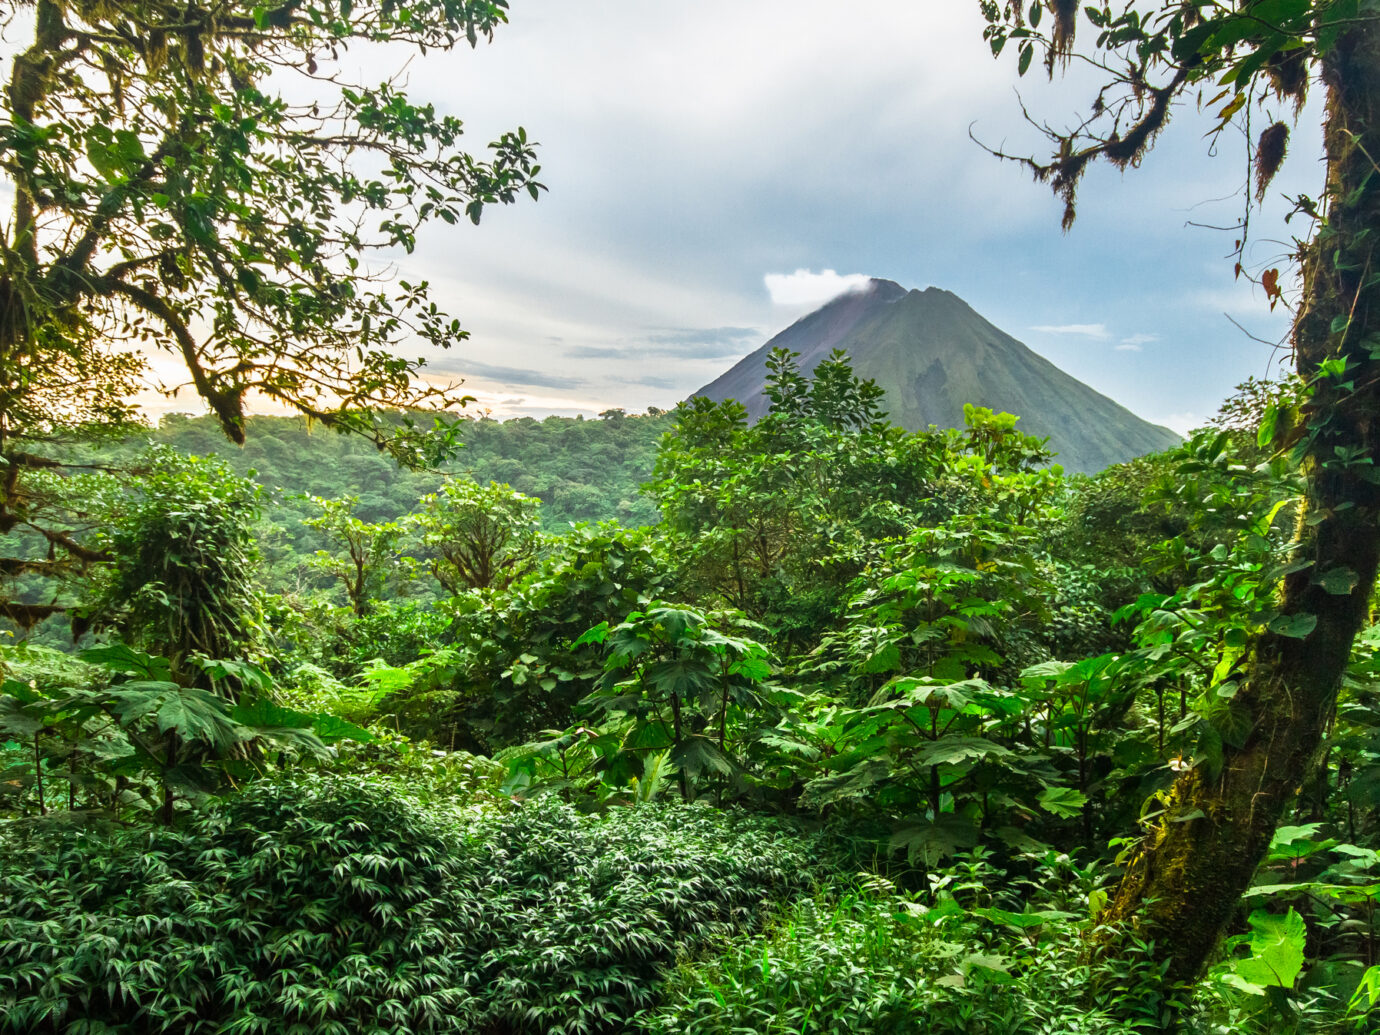 Volcan Arenal rises out of the jungle and dominates the landscape near the town of La Fortuna, Costa Rica.